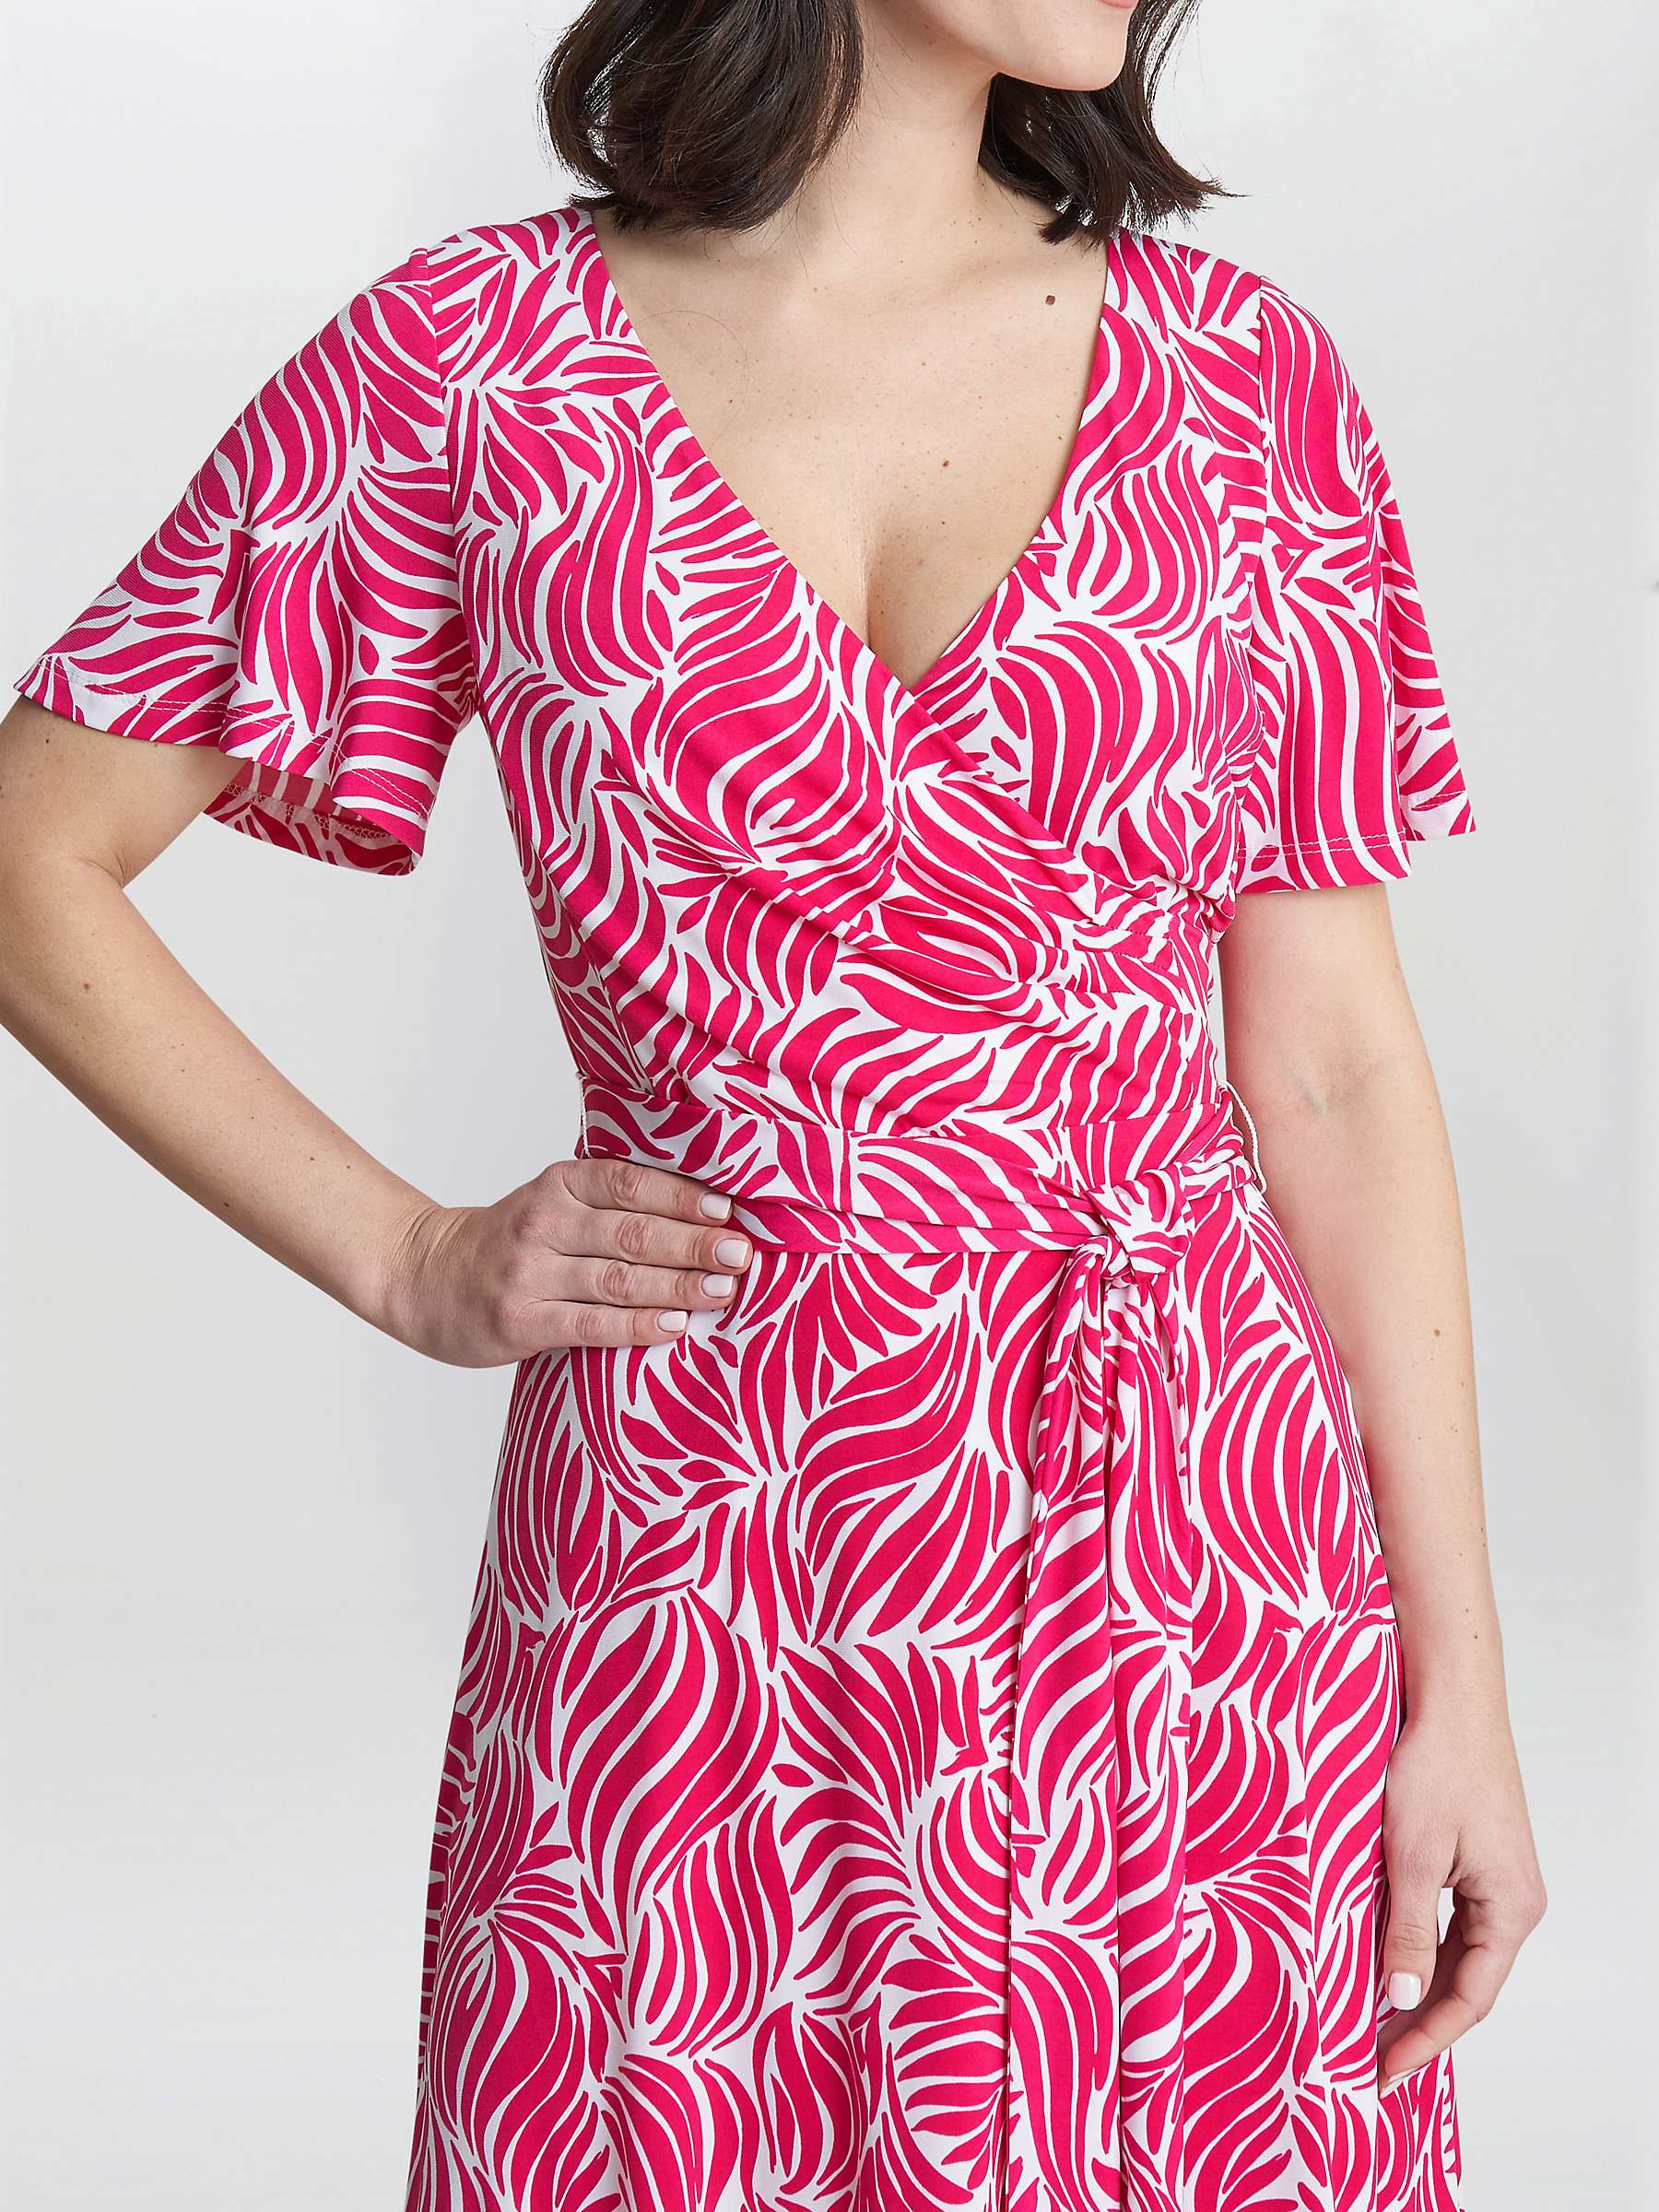 Buy Gina Bacconi Lacey Fit And Flare Dress, Dark Pink/White Online at johnlewis.com